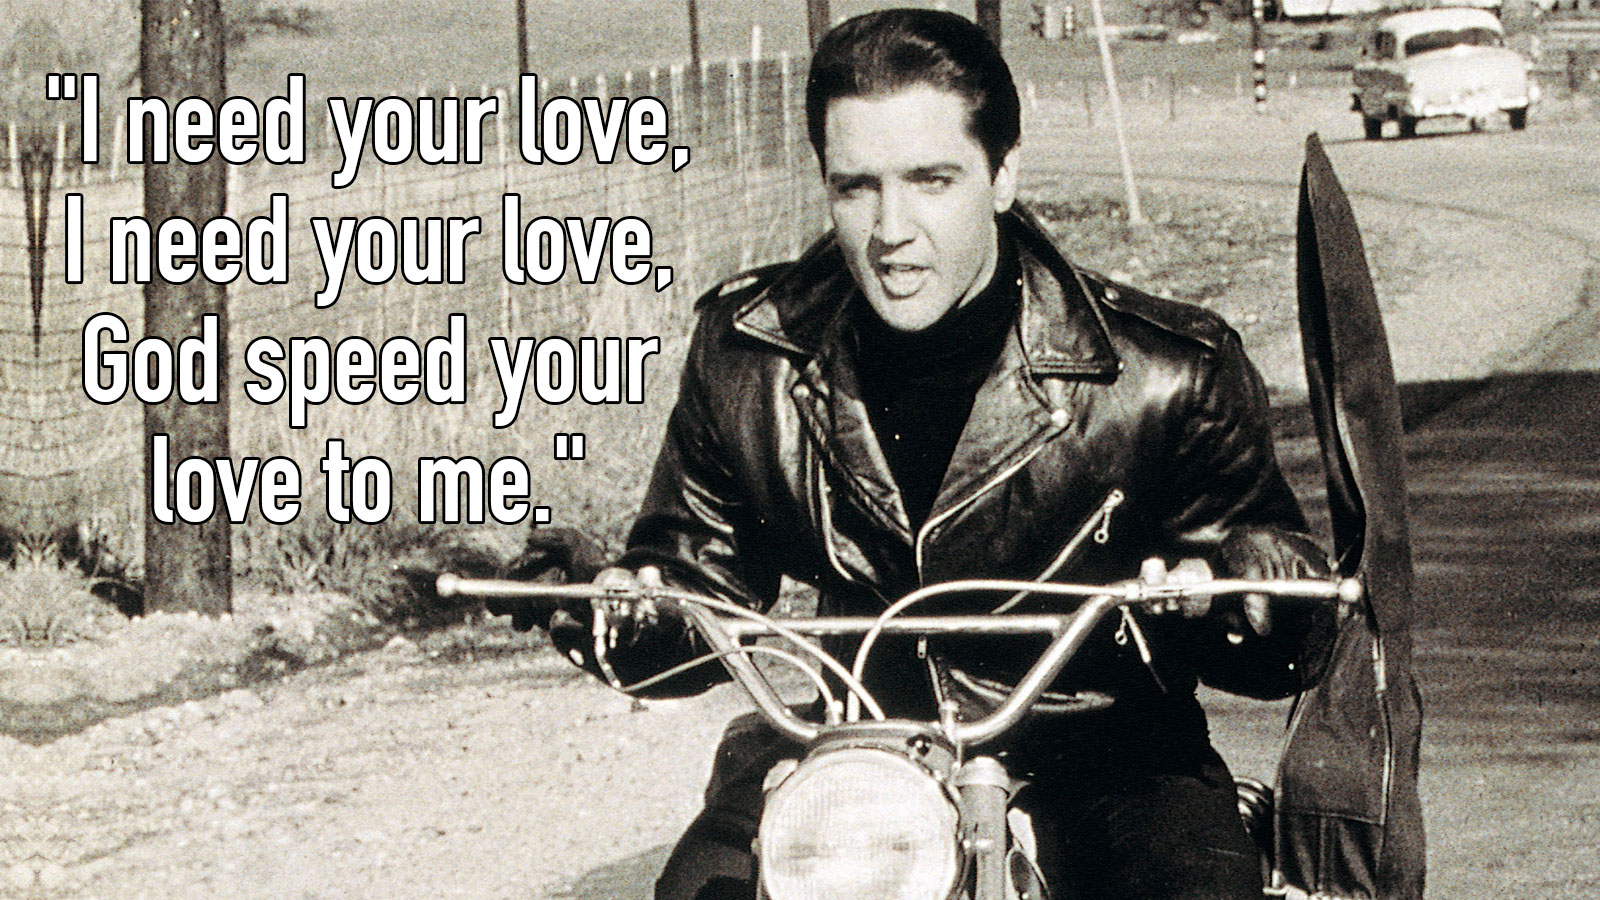 Can You Guess the Elvis Presley Song This Lyric Is From? Quiz 151